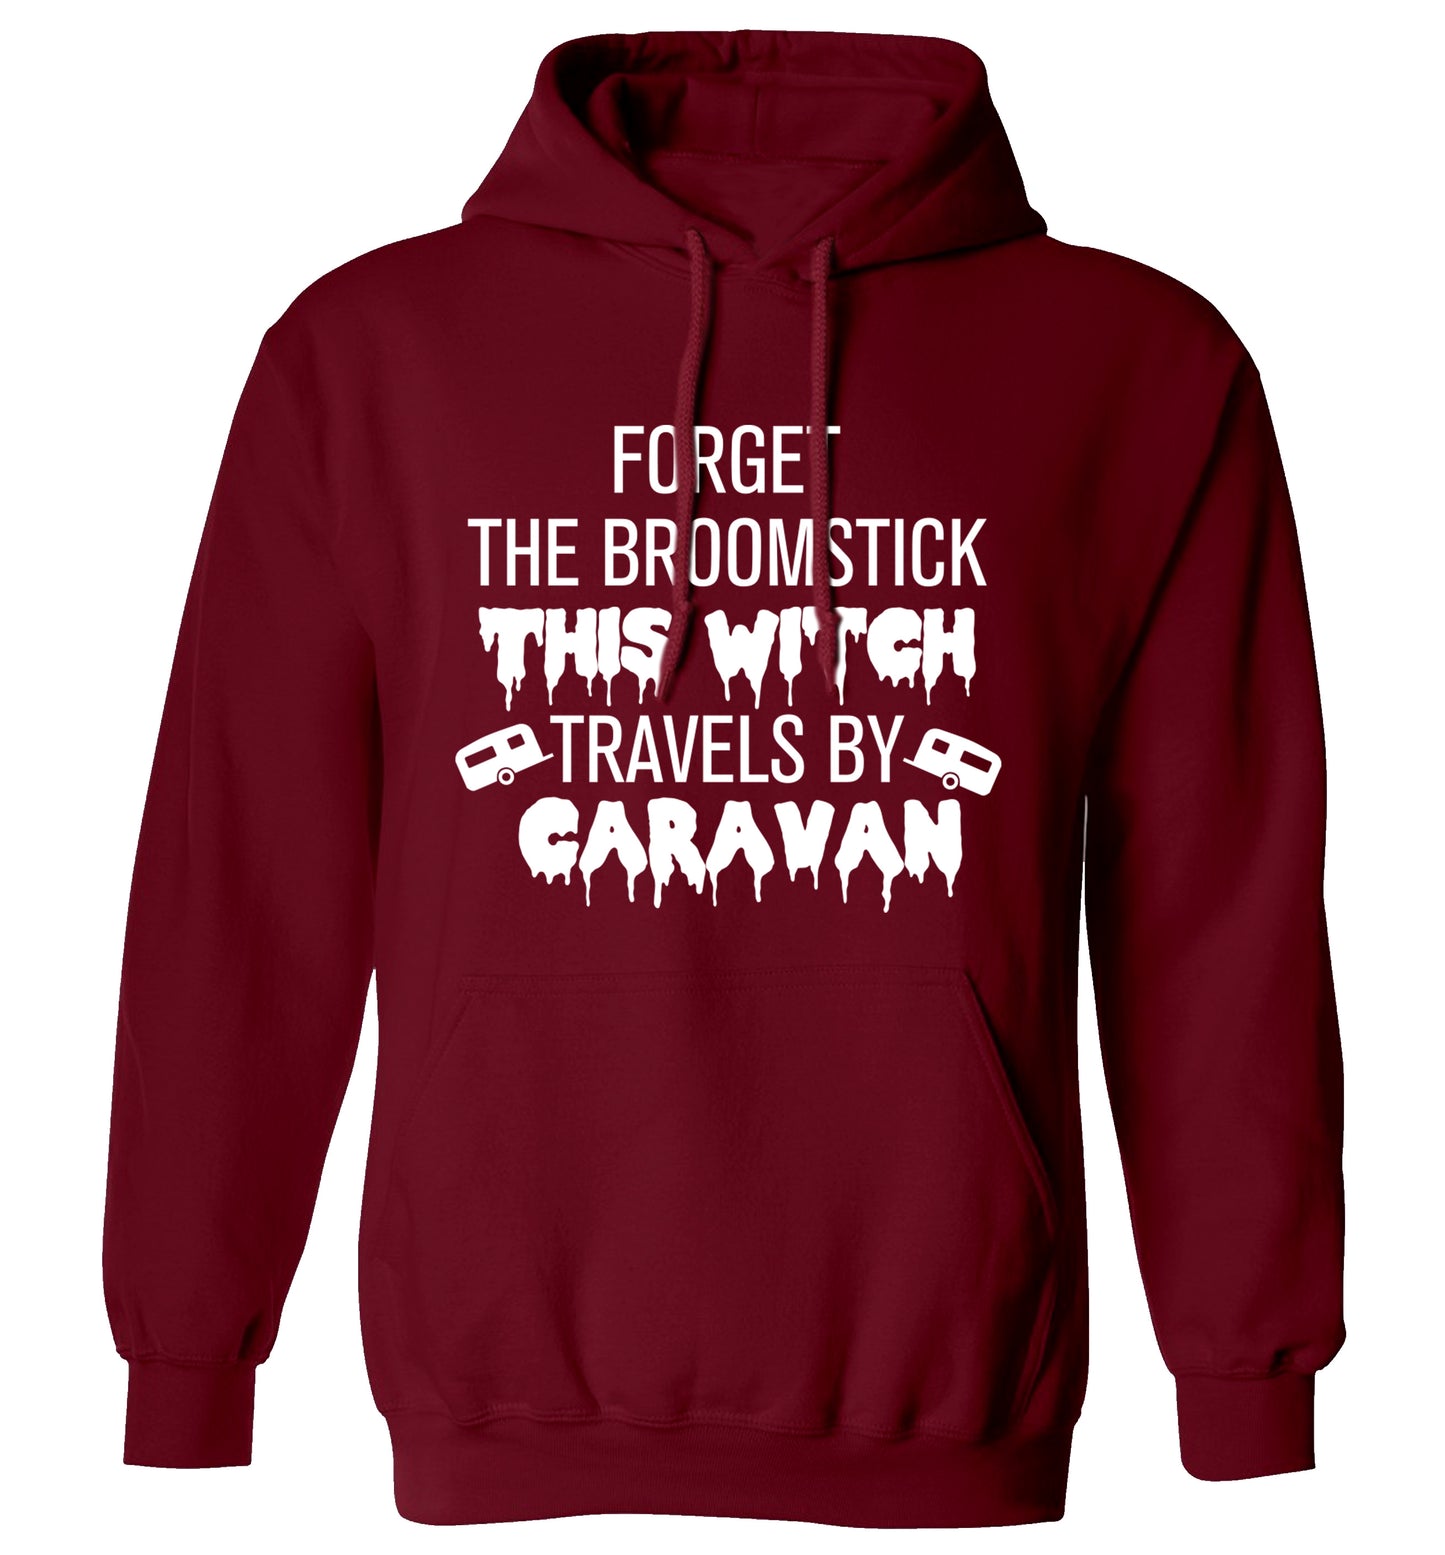 Forget the broomstick this witch travels by caravan adults unisexmaroon hoodie 2XL